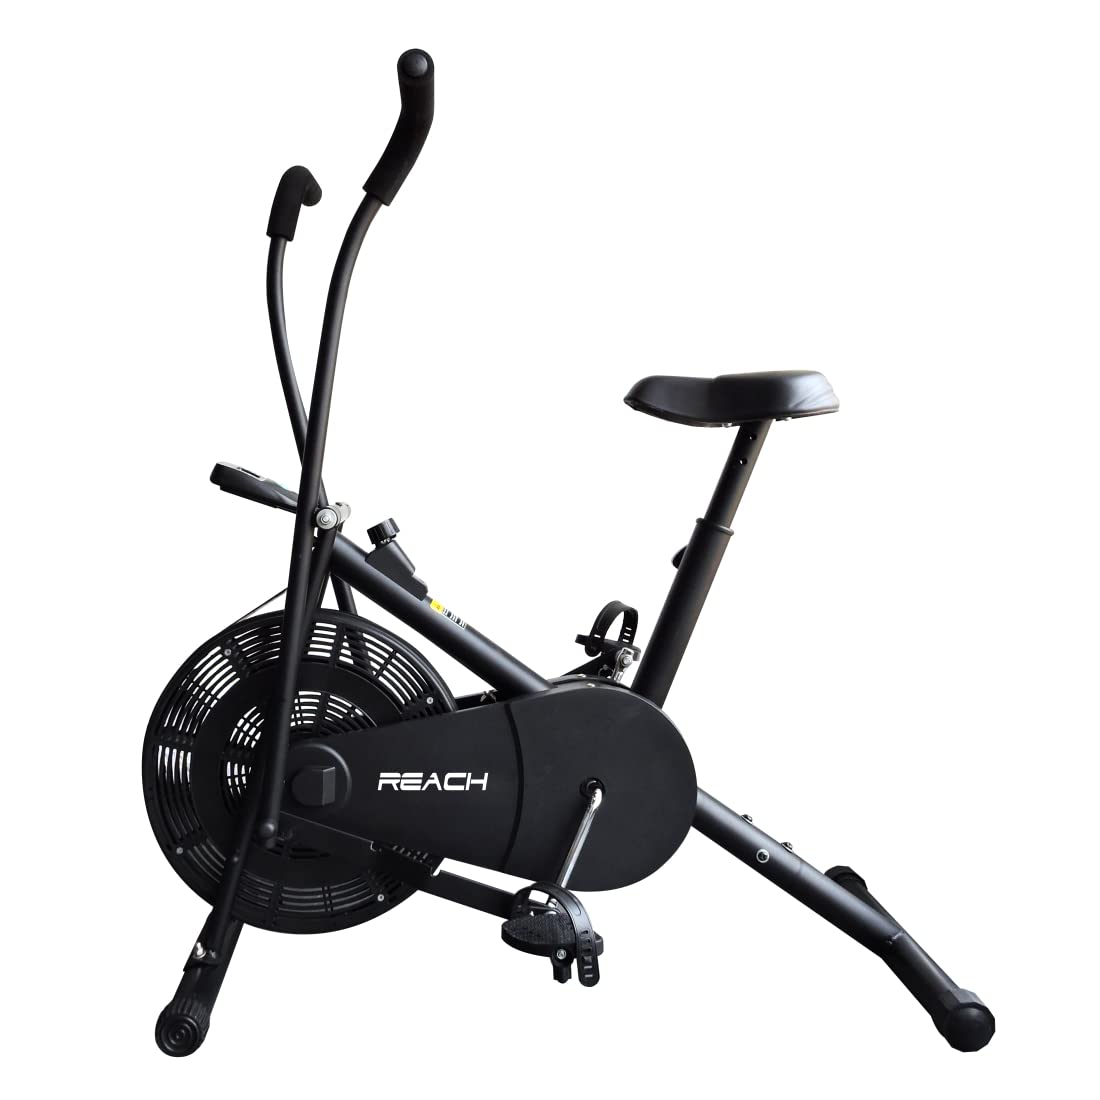 ELEV8 by Reach AB-110 Air Bike Exercise Cycle with Moving or Stationary Handle | Adjustable Resistance with Cushioned Seat | Fitness Cycle for Home Gym